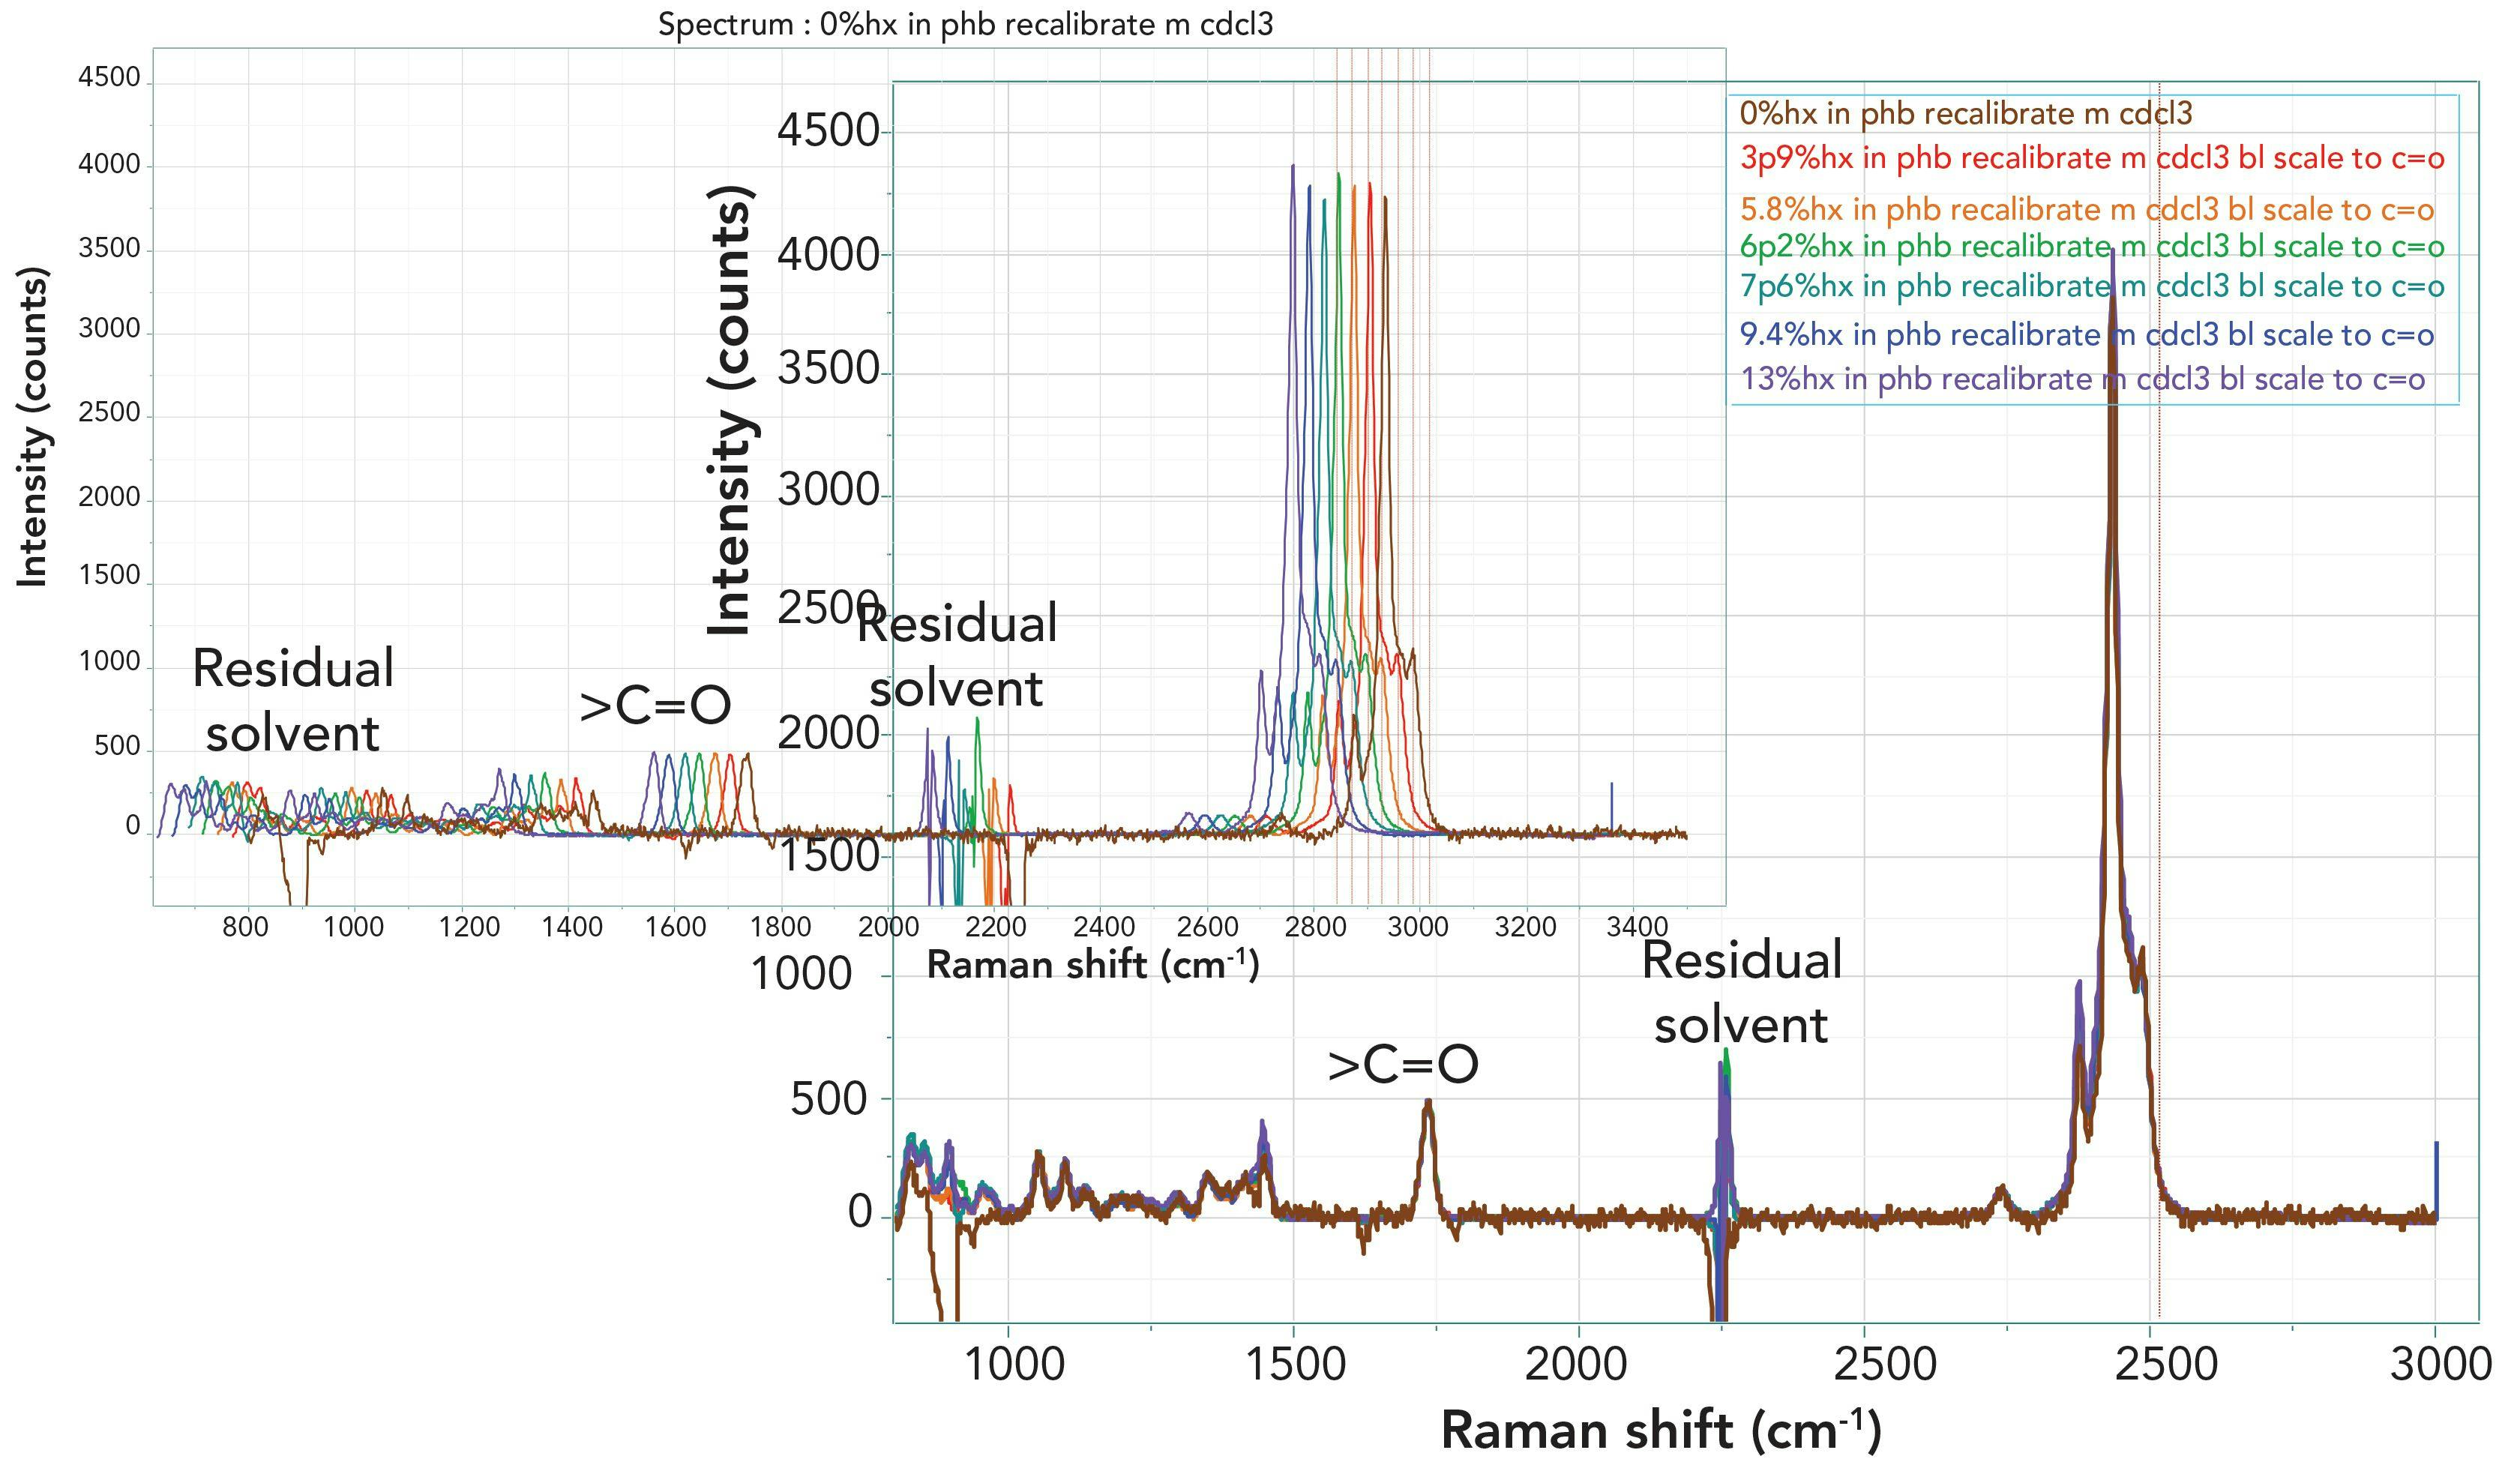 FIGURE 2: Full Raman spectra of all seven Nodax samples after subtraction of the CDCl3 solvent spectrum and scaling to the carbonyl band. On the bottom right, the spectra are exactly overlaid. On the top left, the spectra are displaced for better comparison.